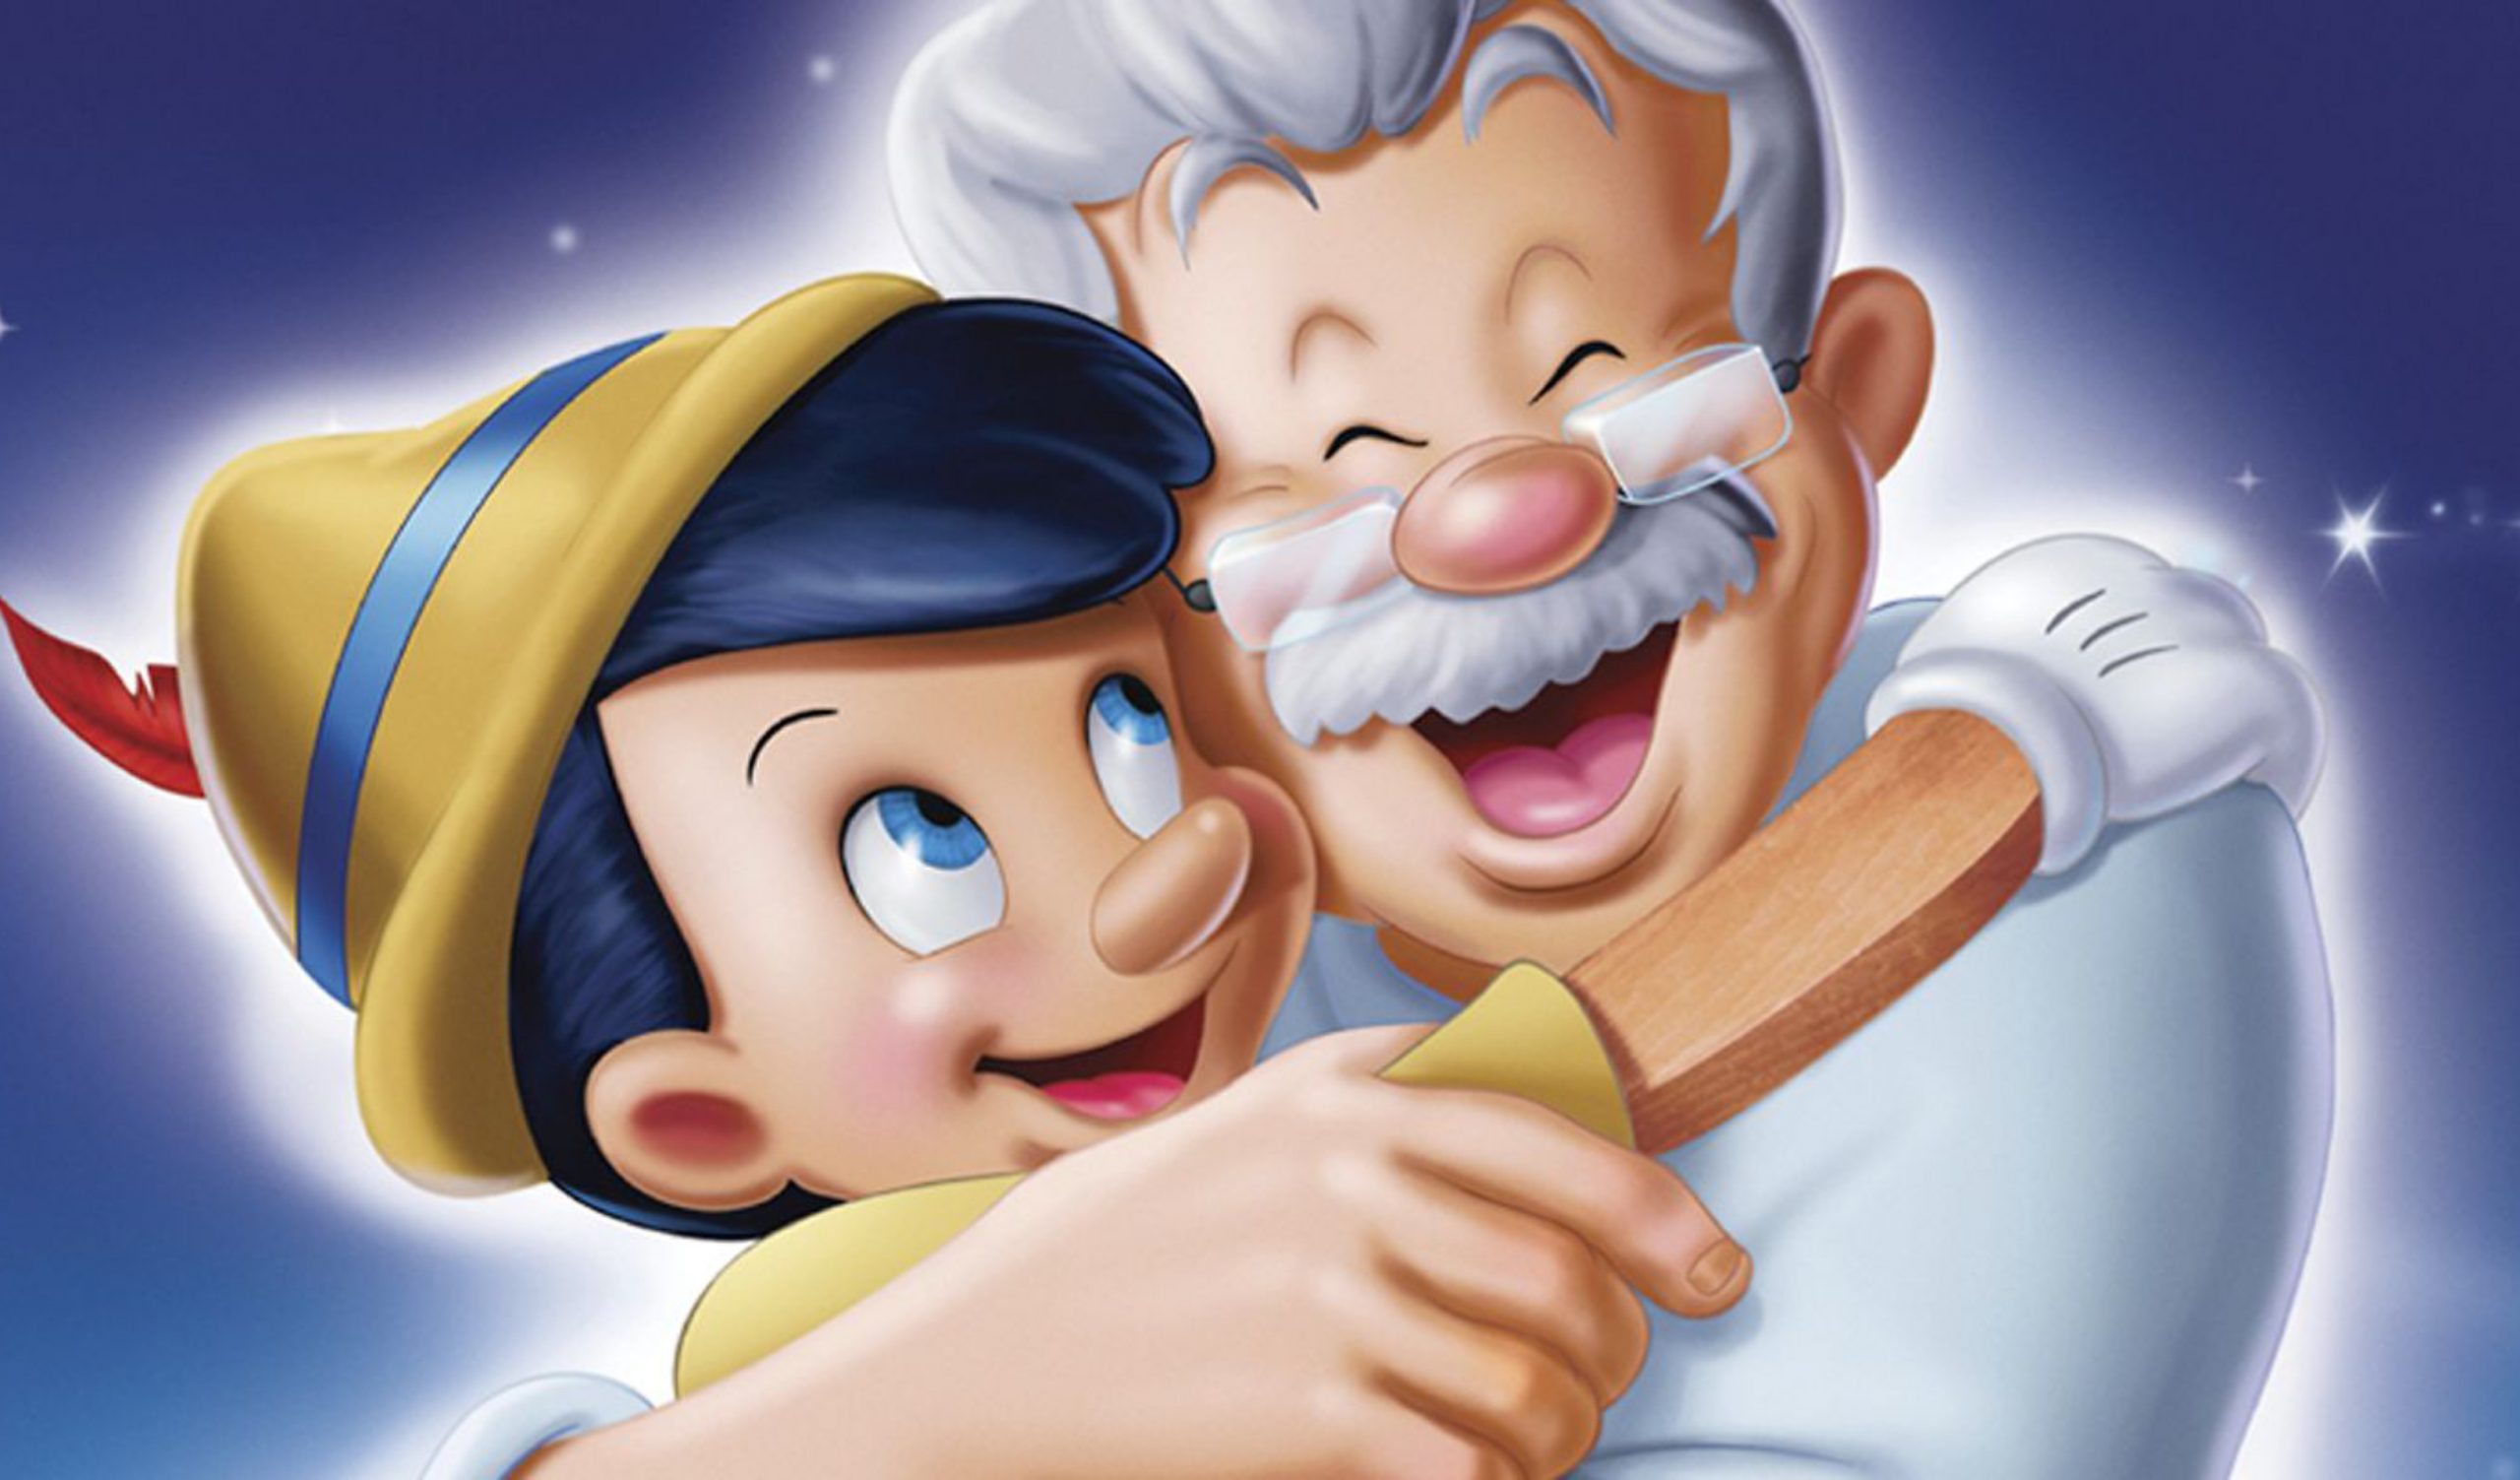 Robert Zemeckis Is Set To Direct Disney’s “Live-Action” Pinocchio